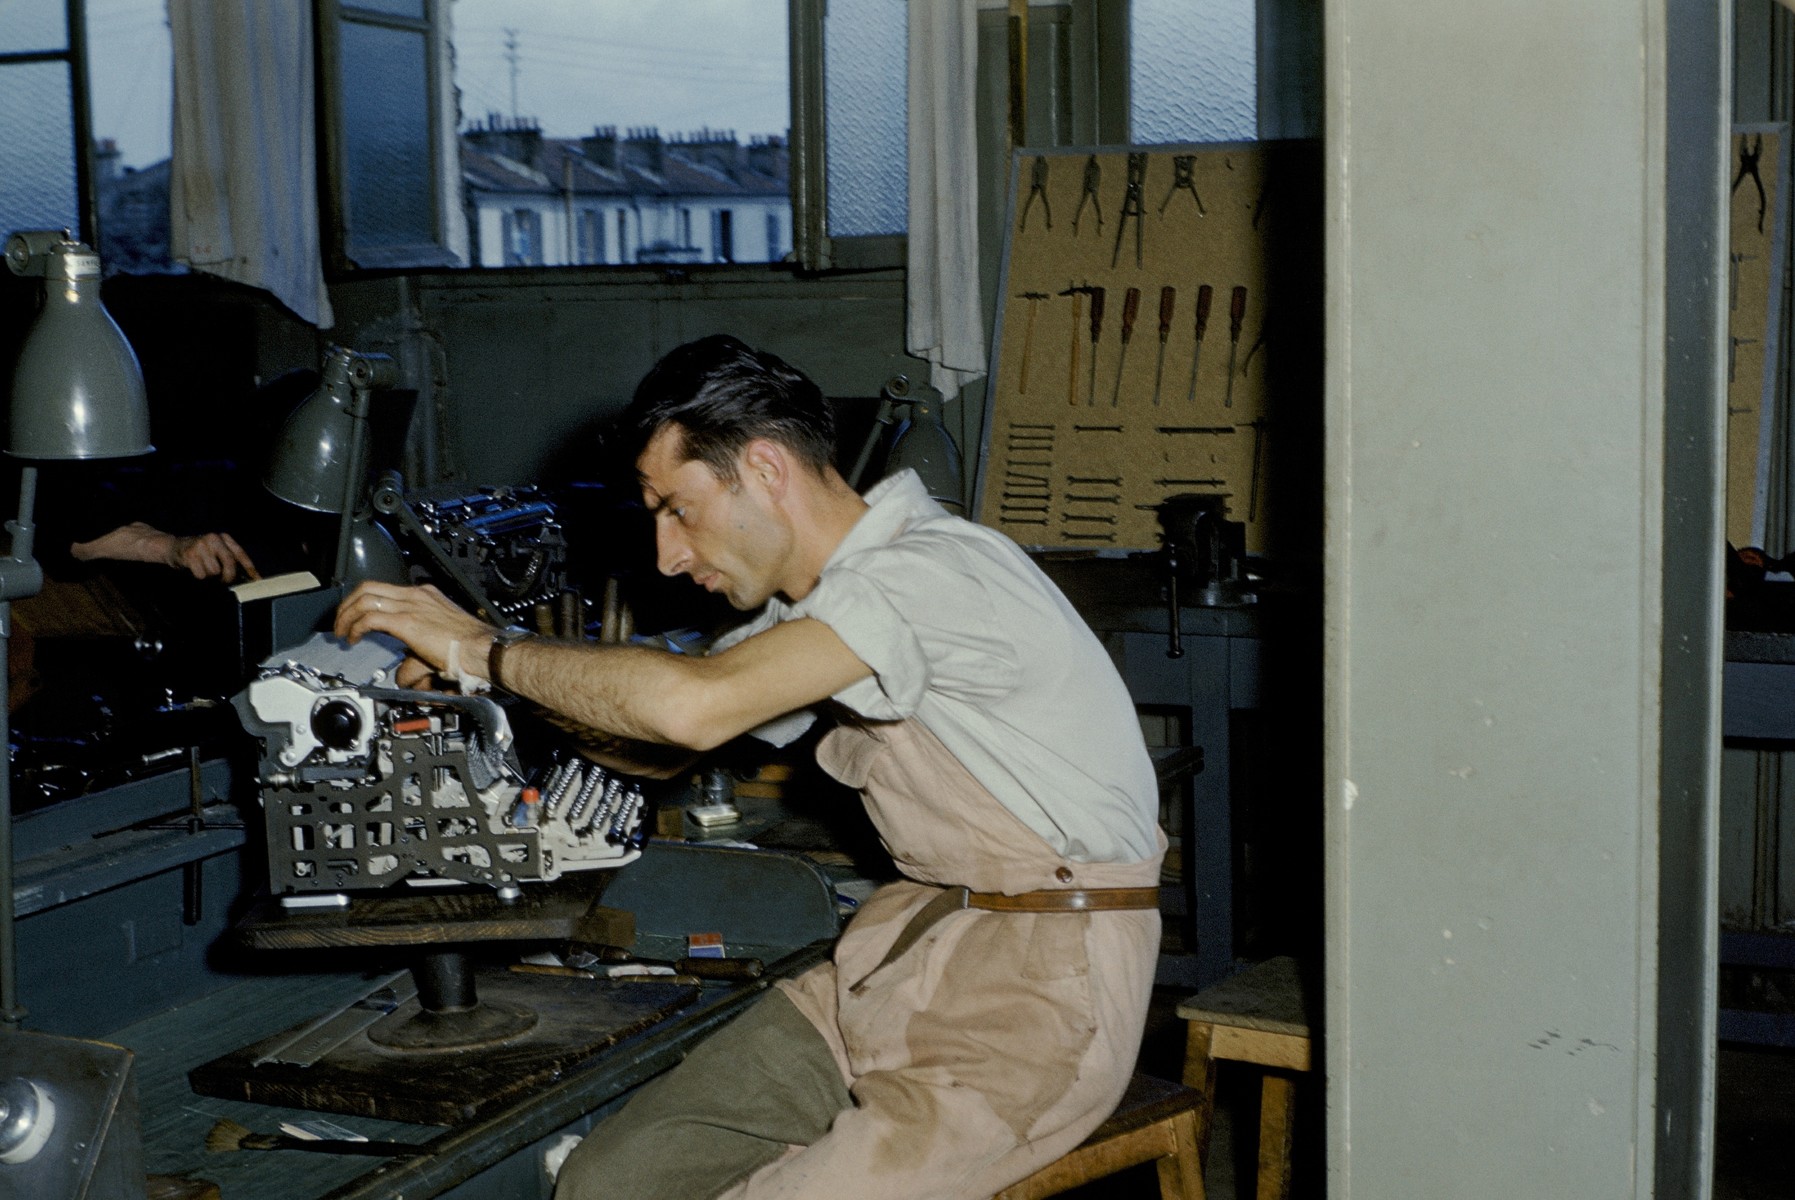 A Jewish DP learns how to repair typewriters in an ORT workshop in an unidentified DP camp.